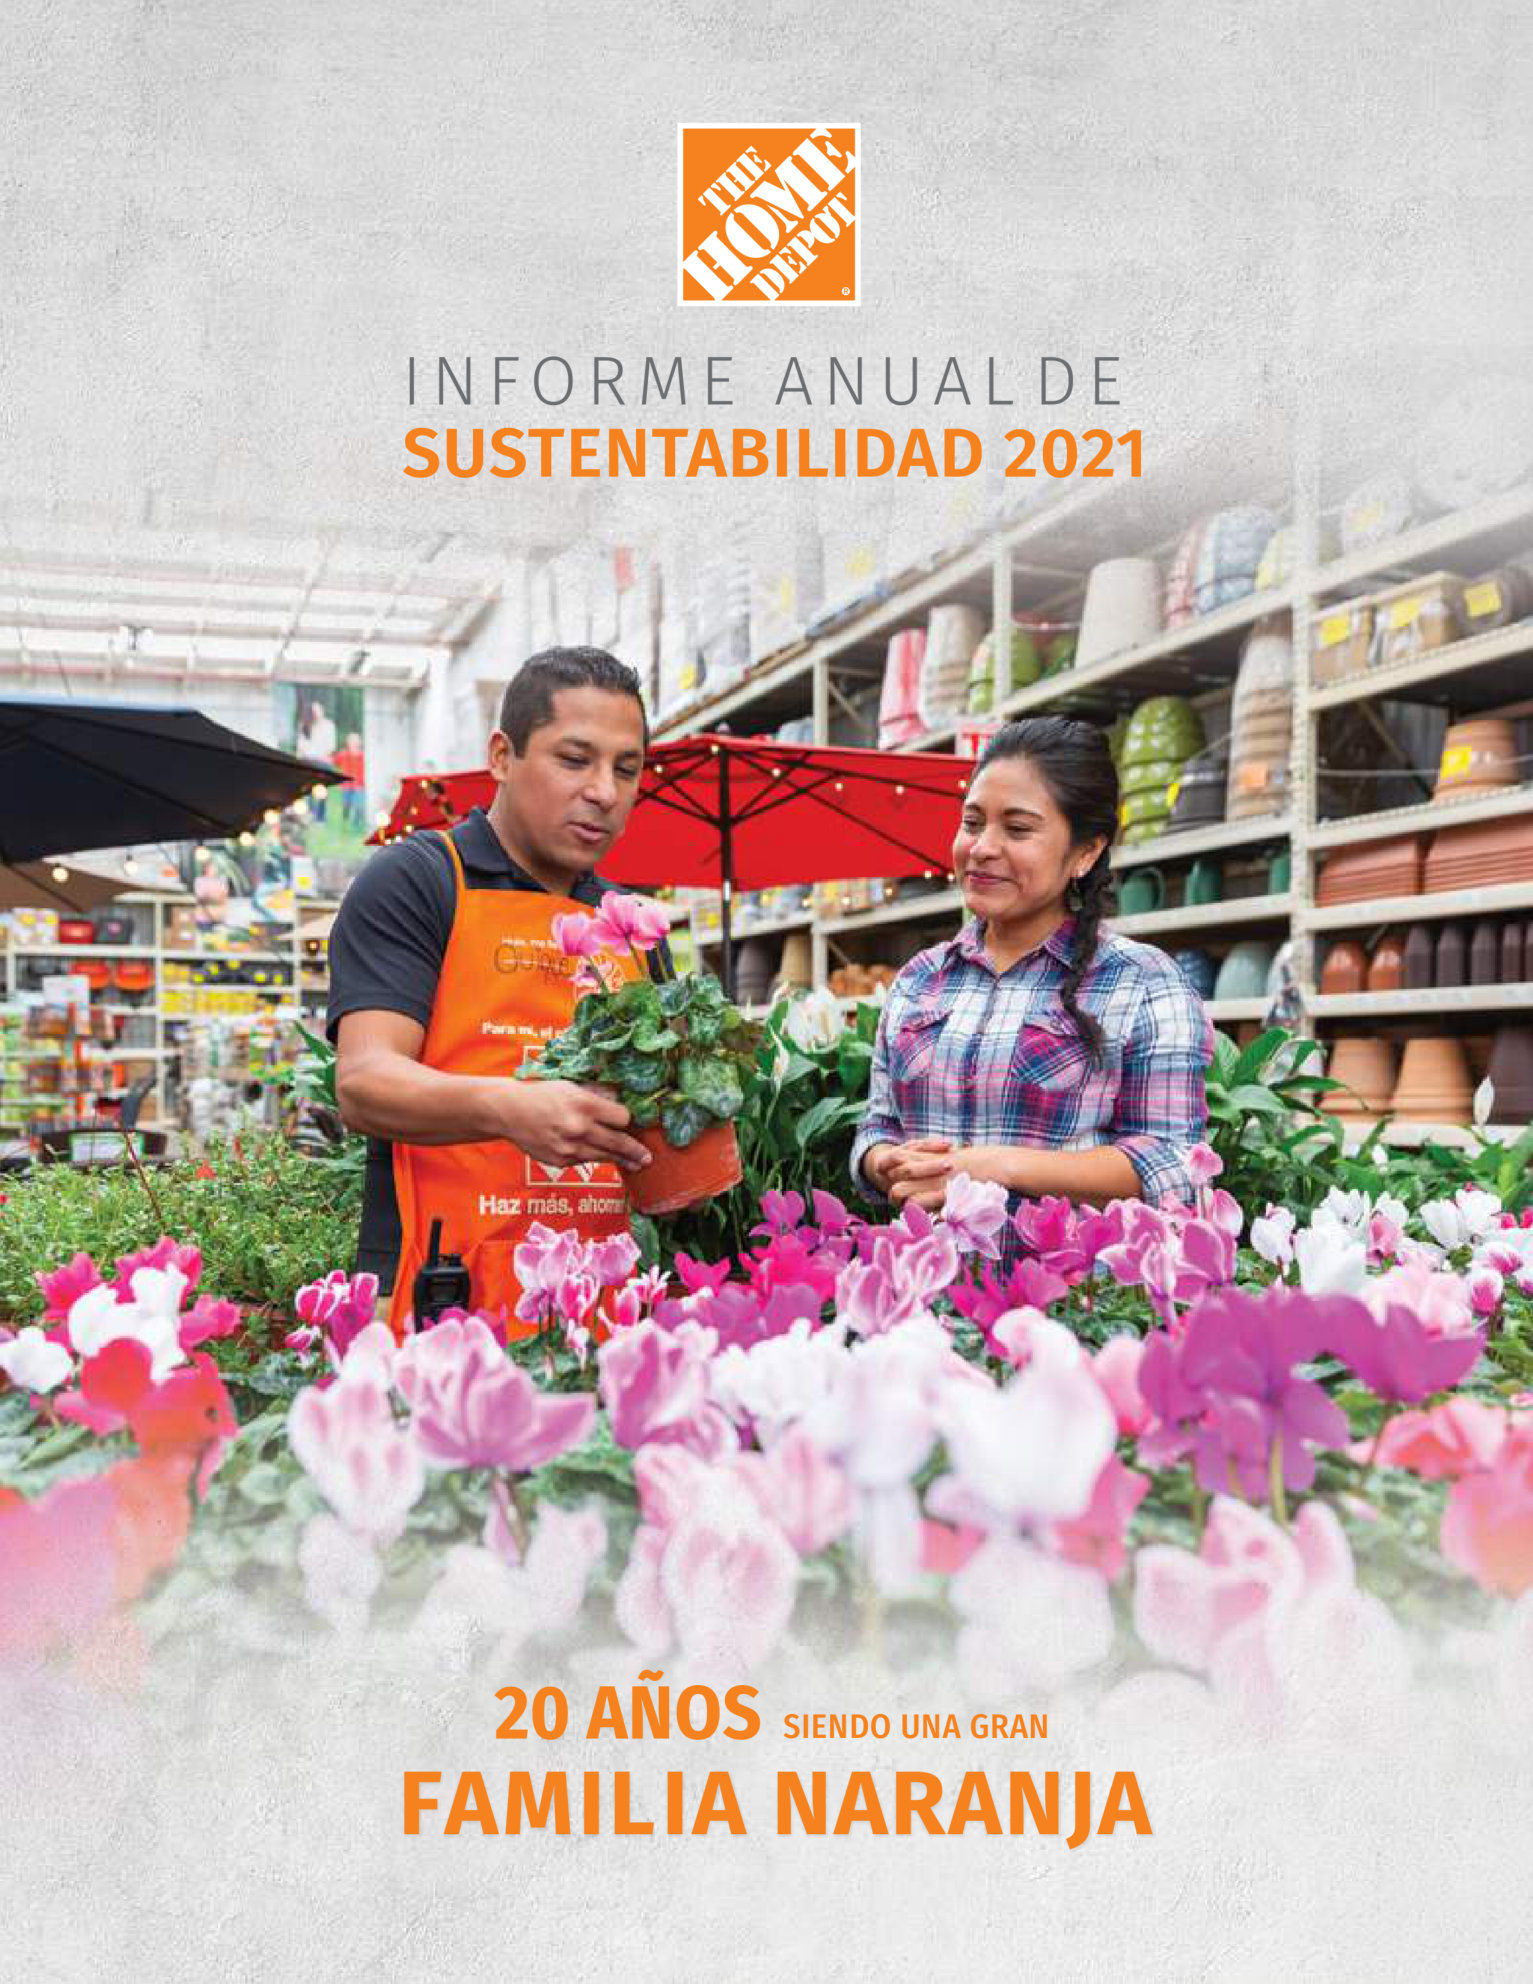 20 YEARS BEING A BIG ORANGE FAMILY / The Home Depot Mexico Sustainability Annual Report 2021